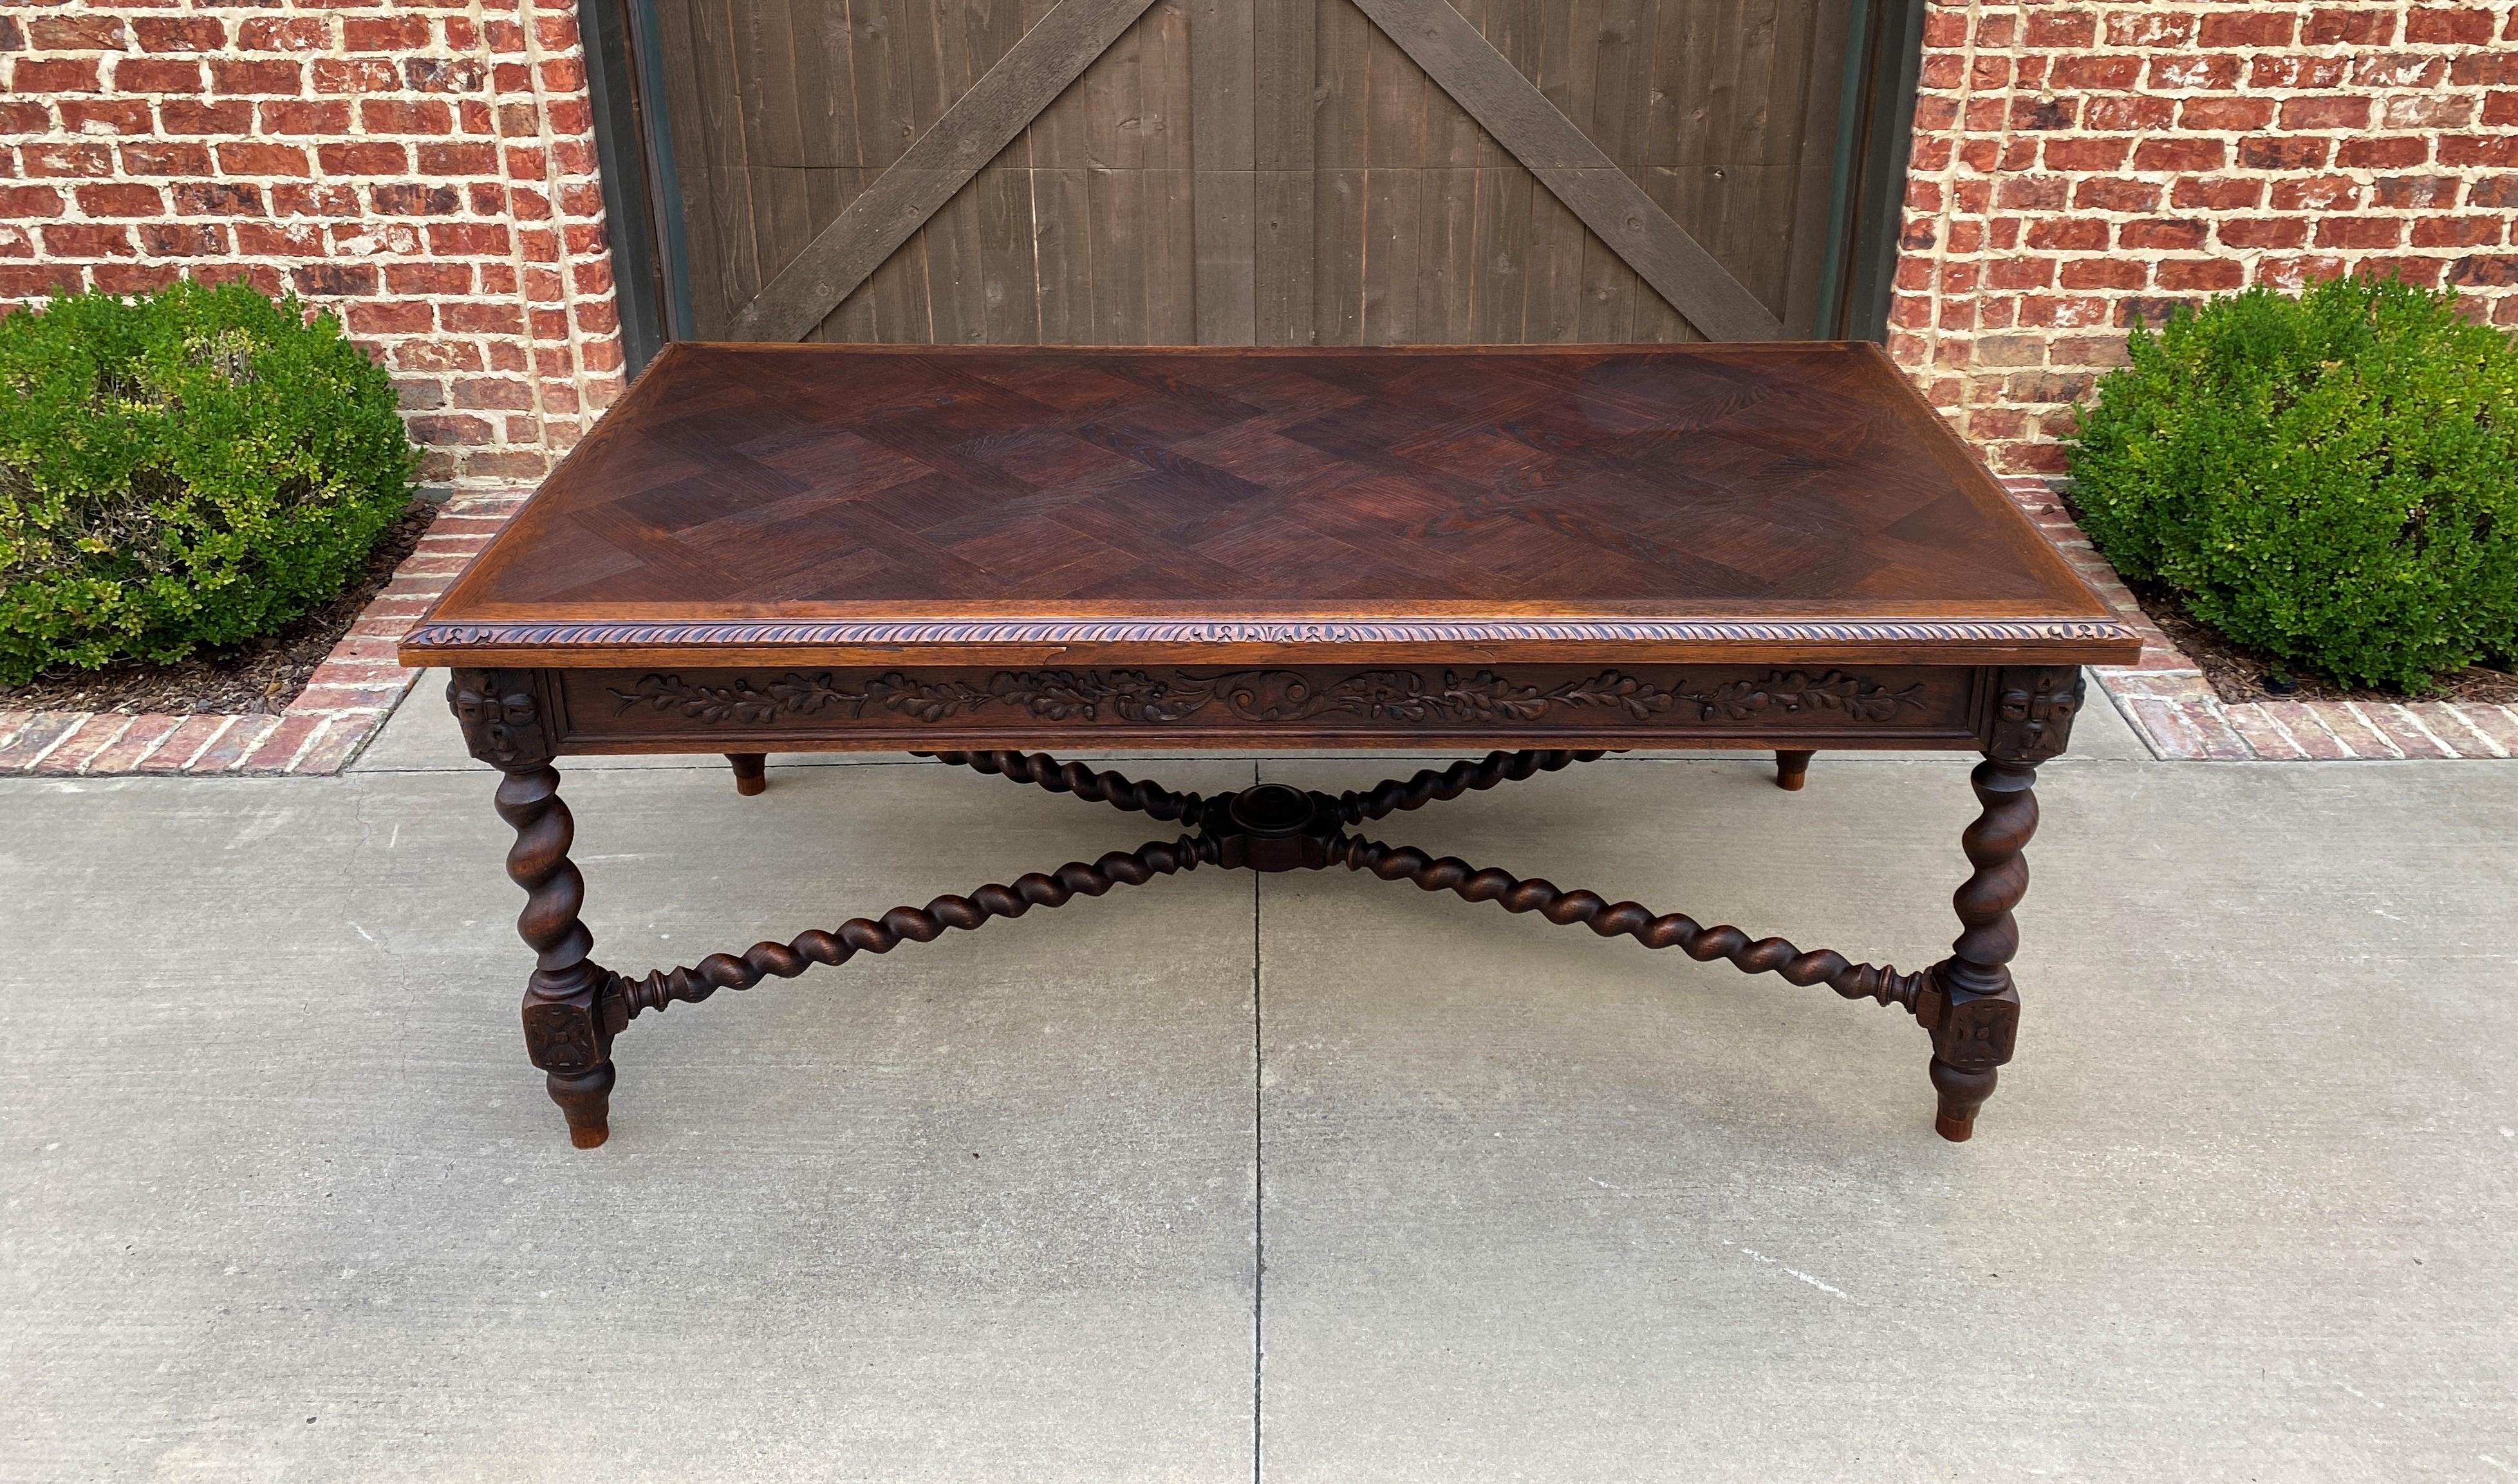 Superb 19th century antique French oak barley twist dining table farm table conference library table or desk~~draw leaf~~c. 1880s

This table has 